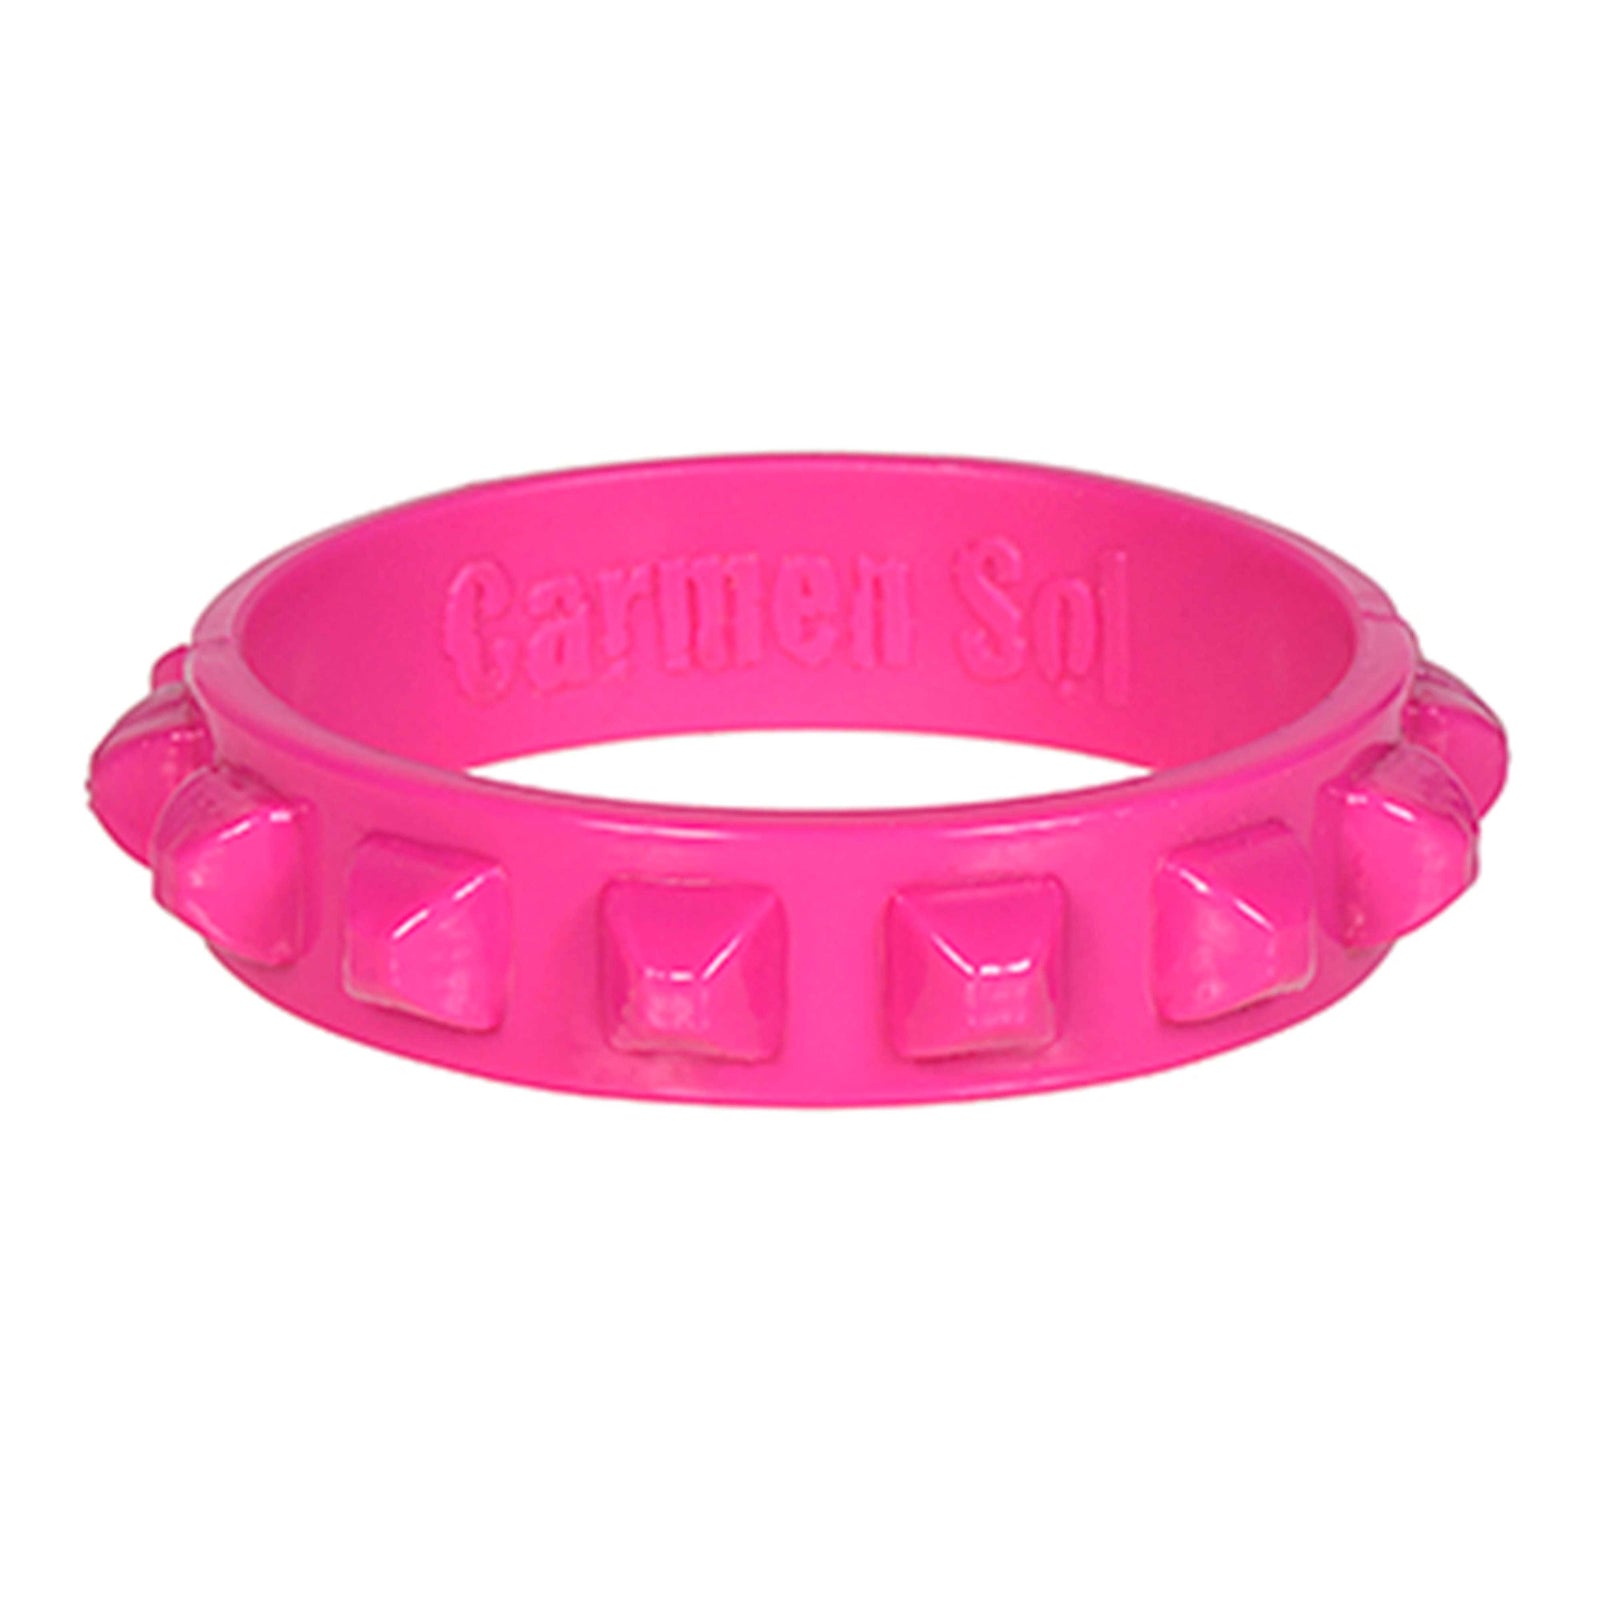 Pink bracelets in material jelly for October